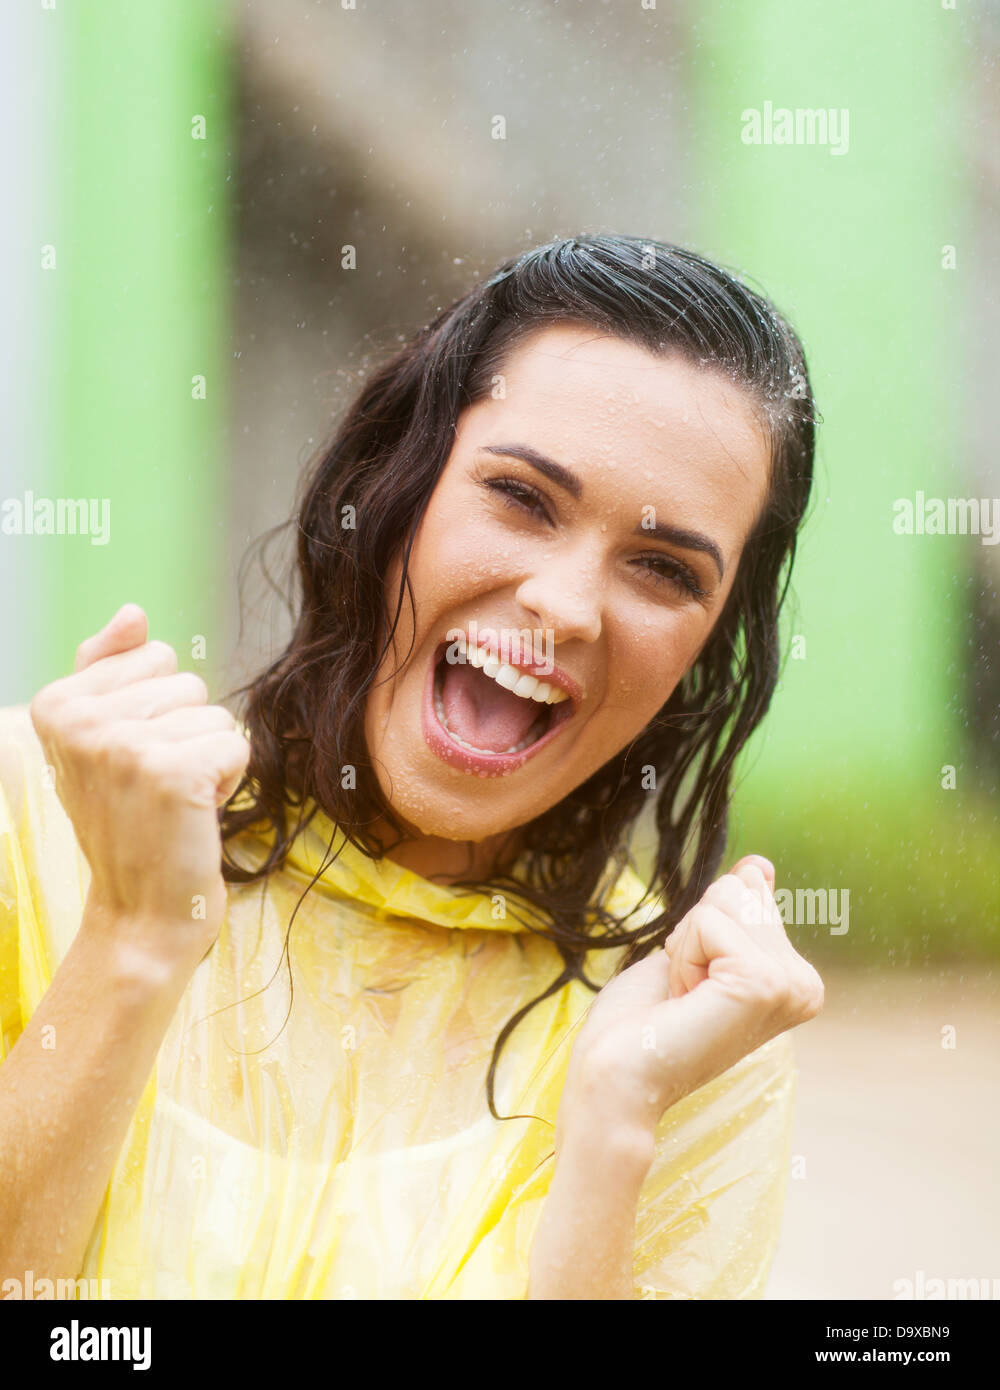 cheerful young woman waving fist in the rain Stock Photo